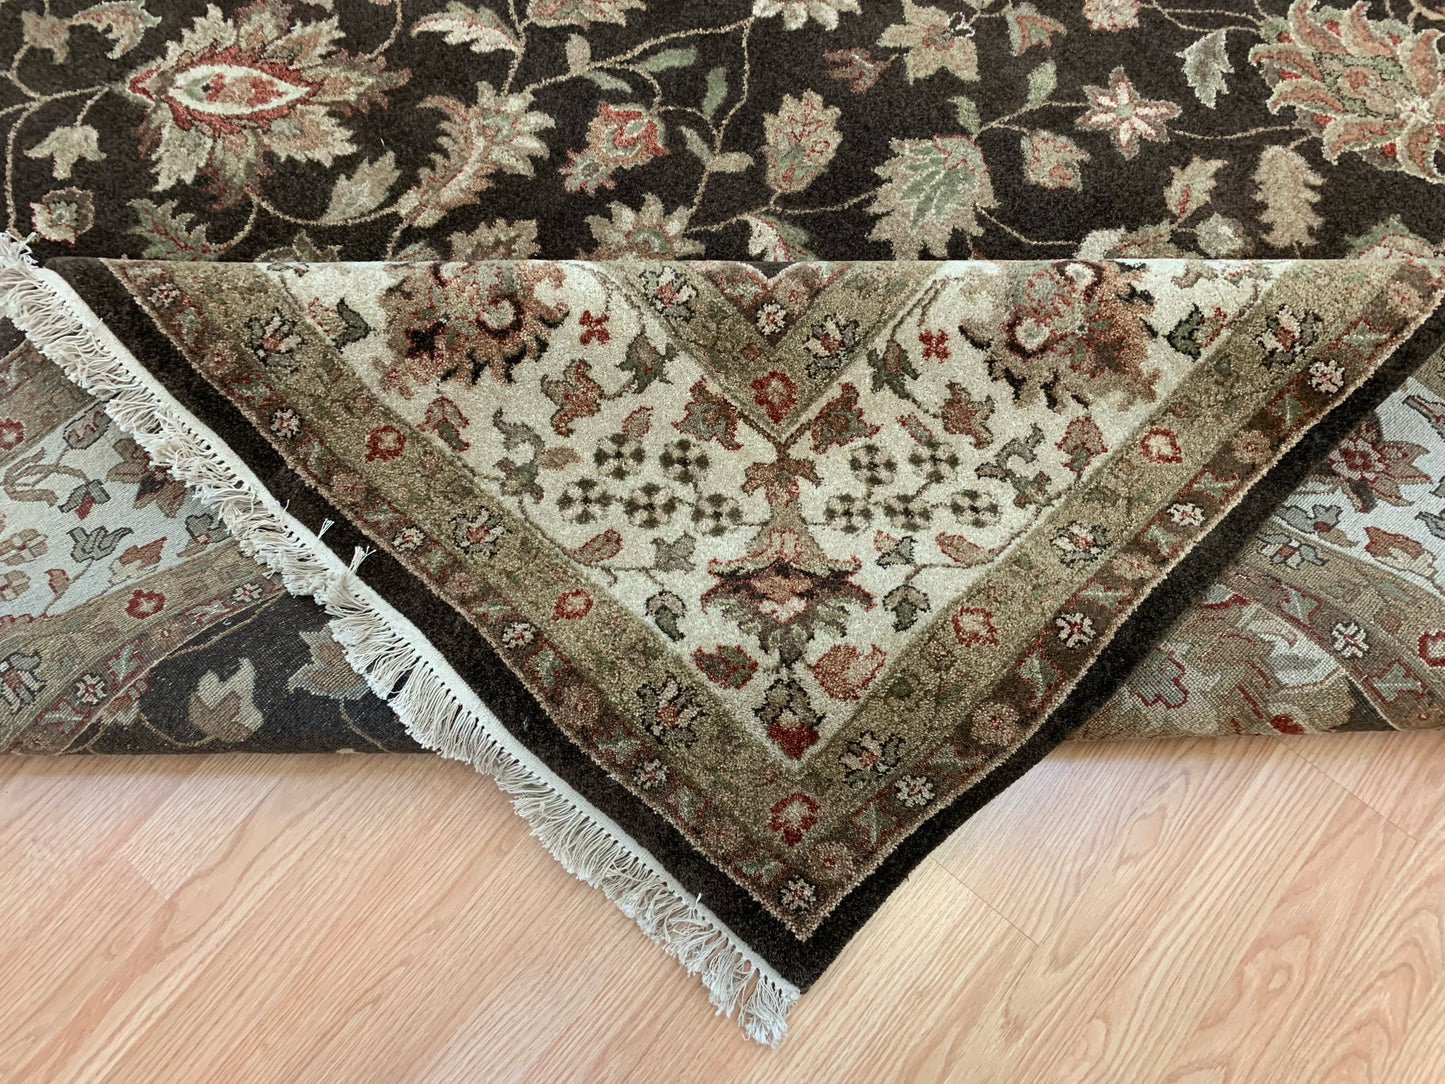 Hand-Knotted Wool Qum Brown/Ivory Rug (9'1"x11'9")